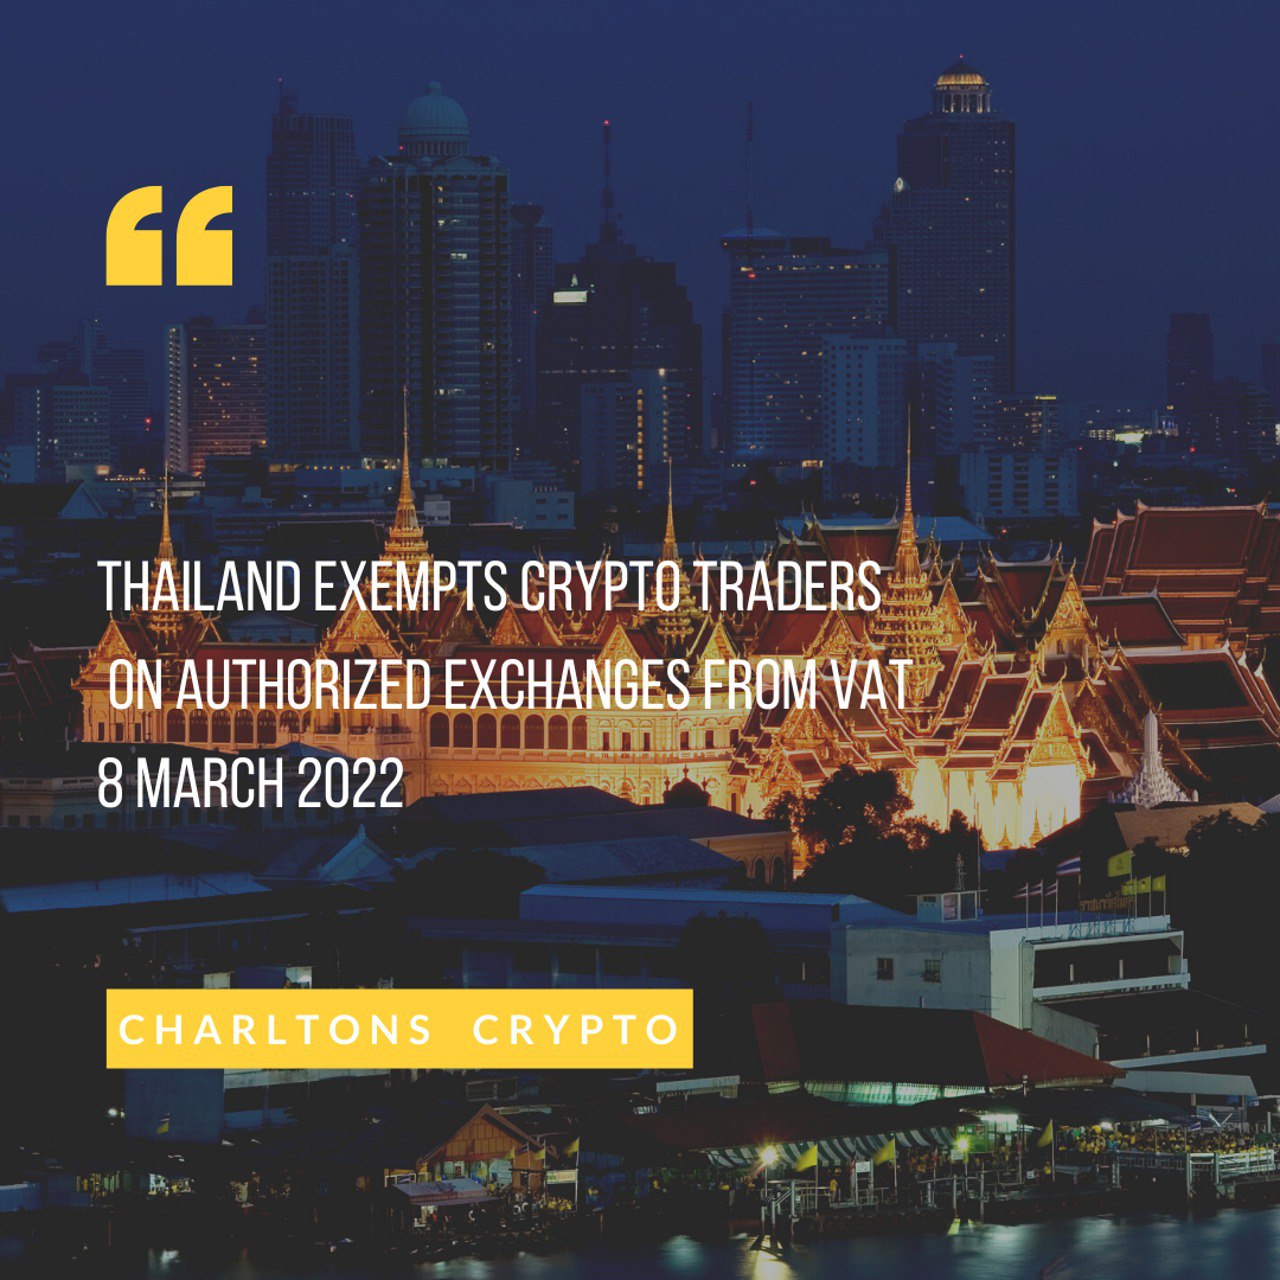 Thailand Exempts Crypto Traders on Authorized Exchanges From Vat 8 March 2022